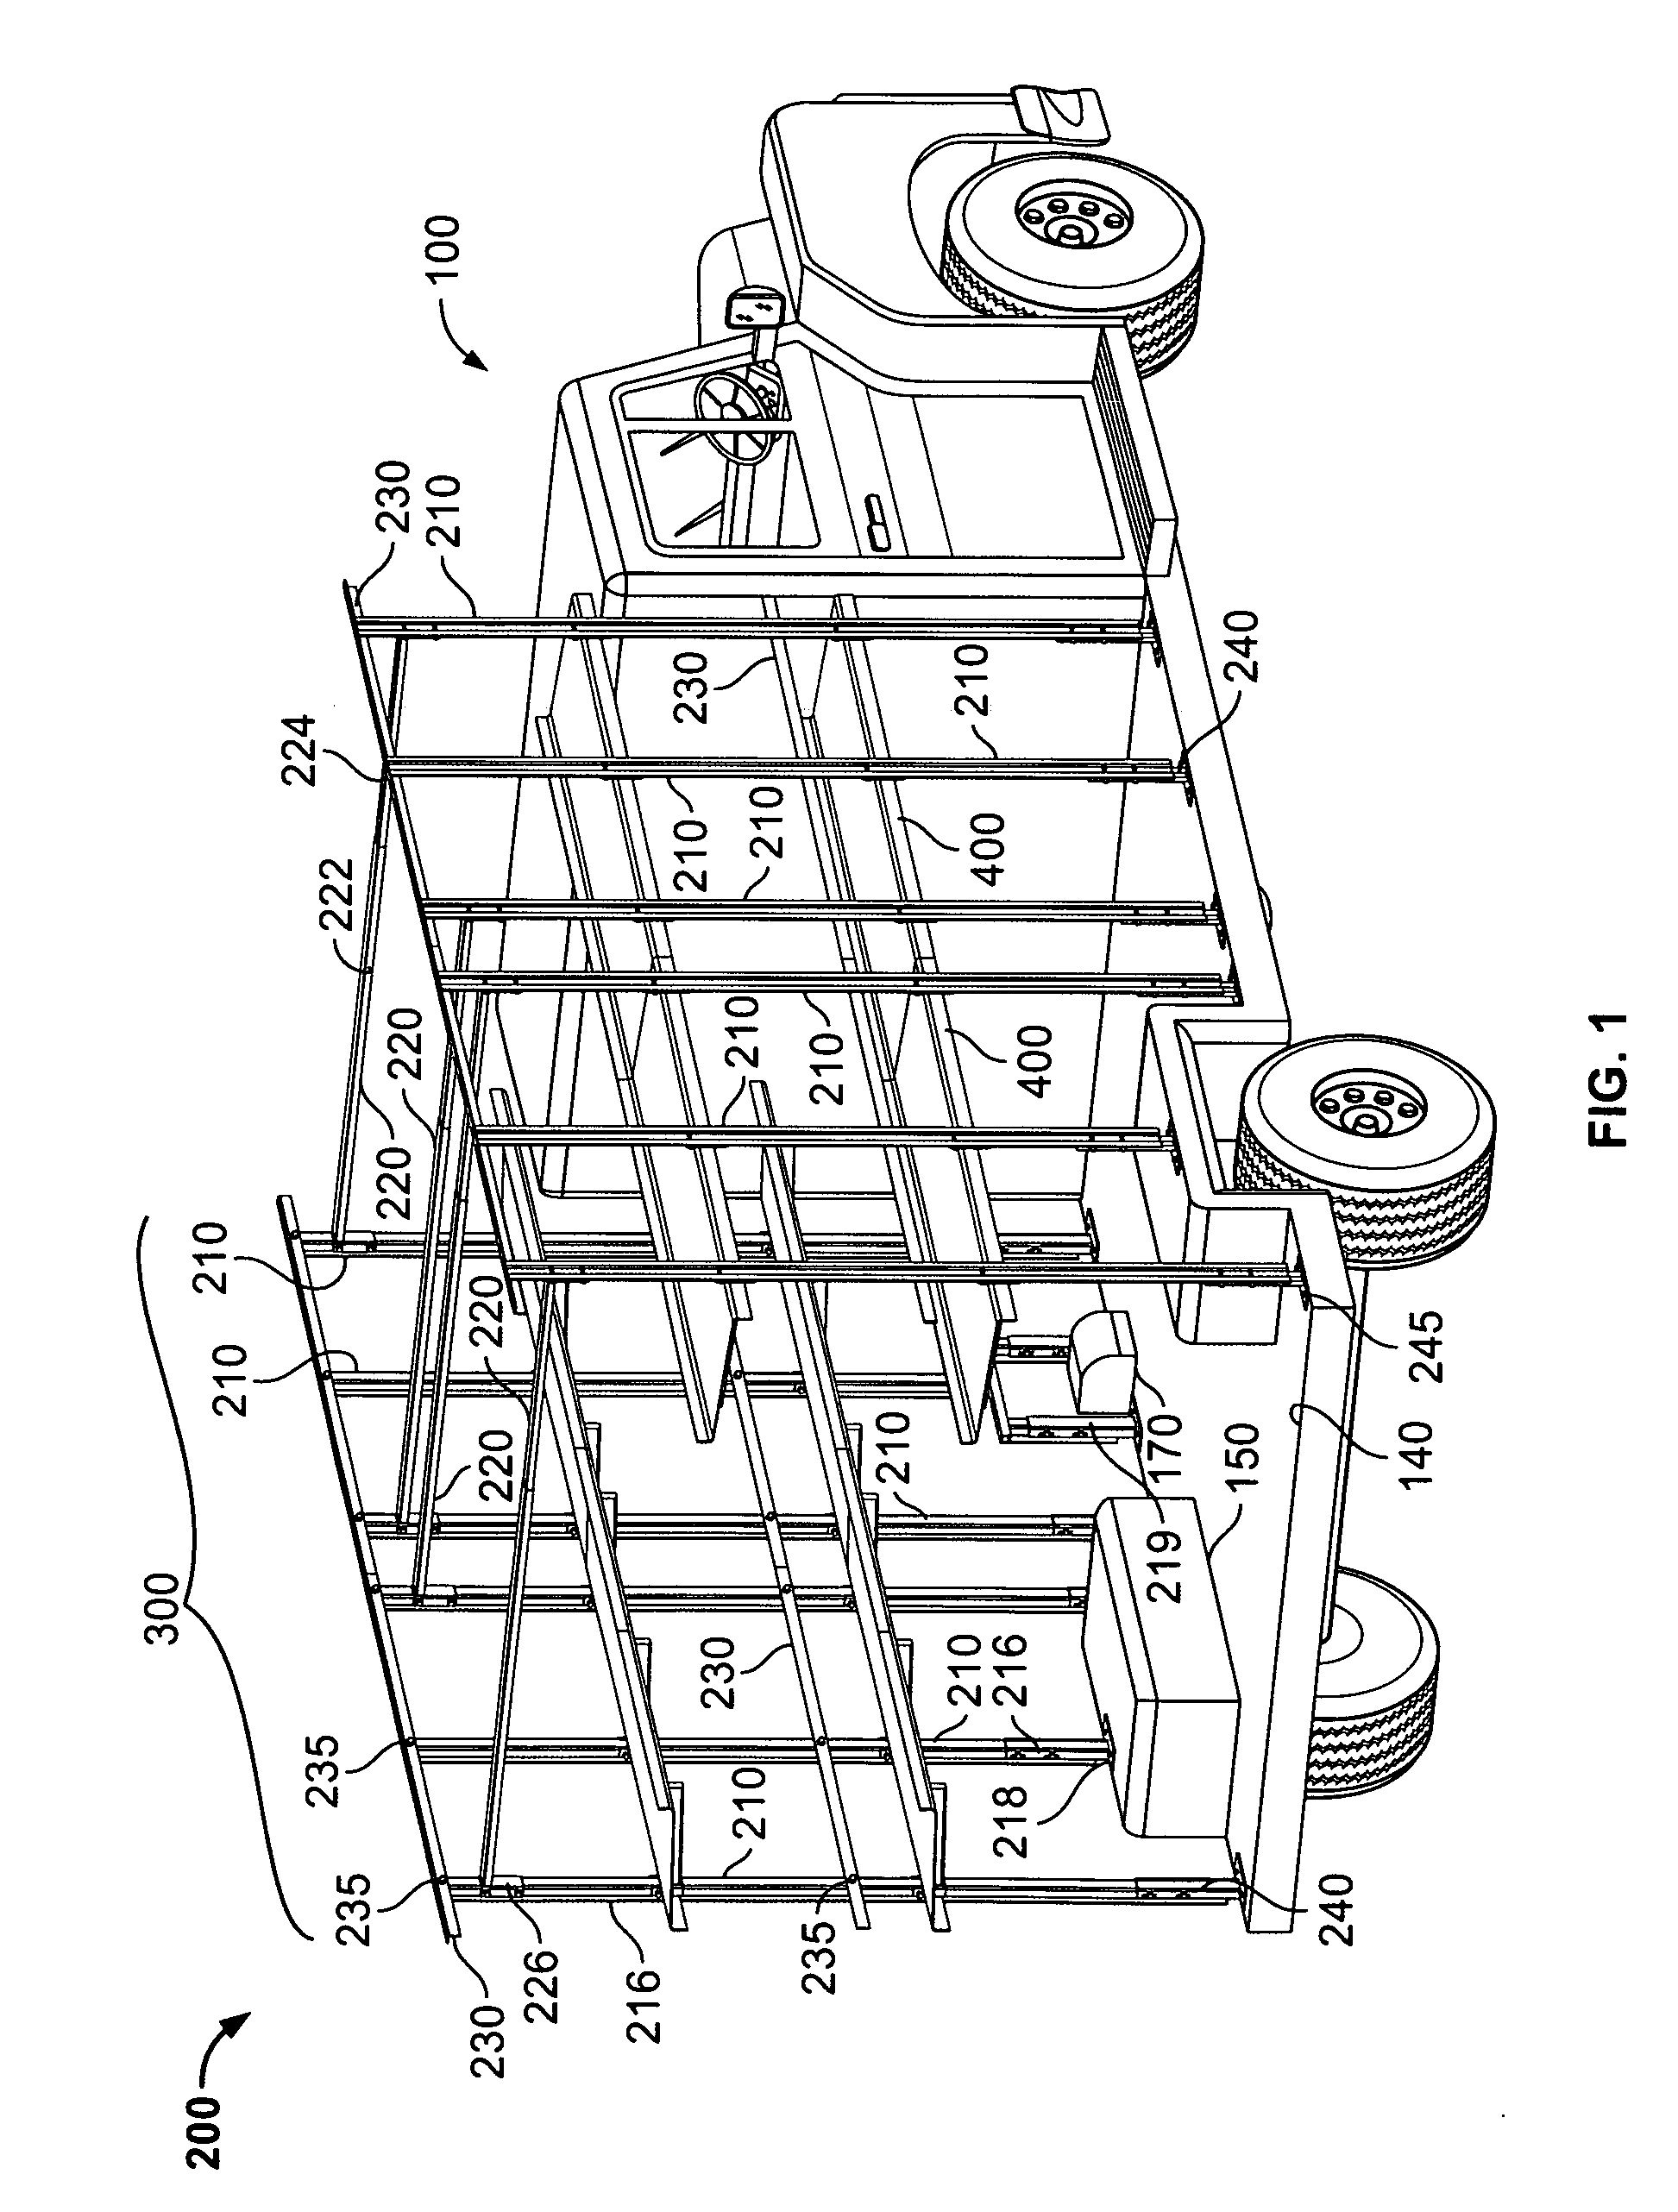 Frame for building a vehicular body with a load bearing support system